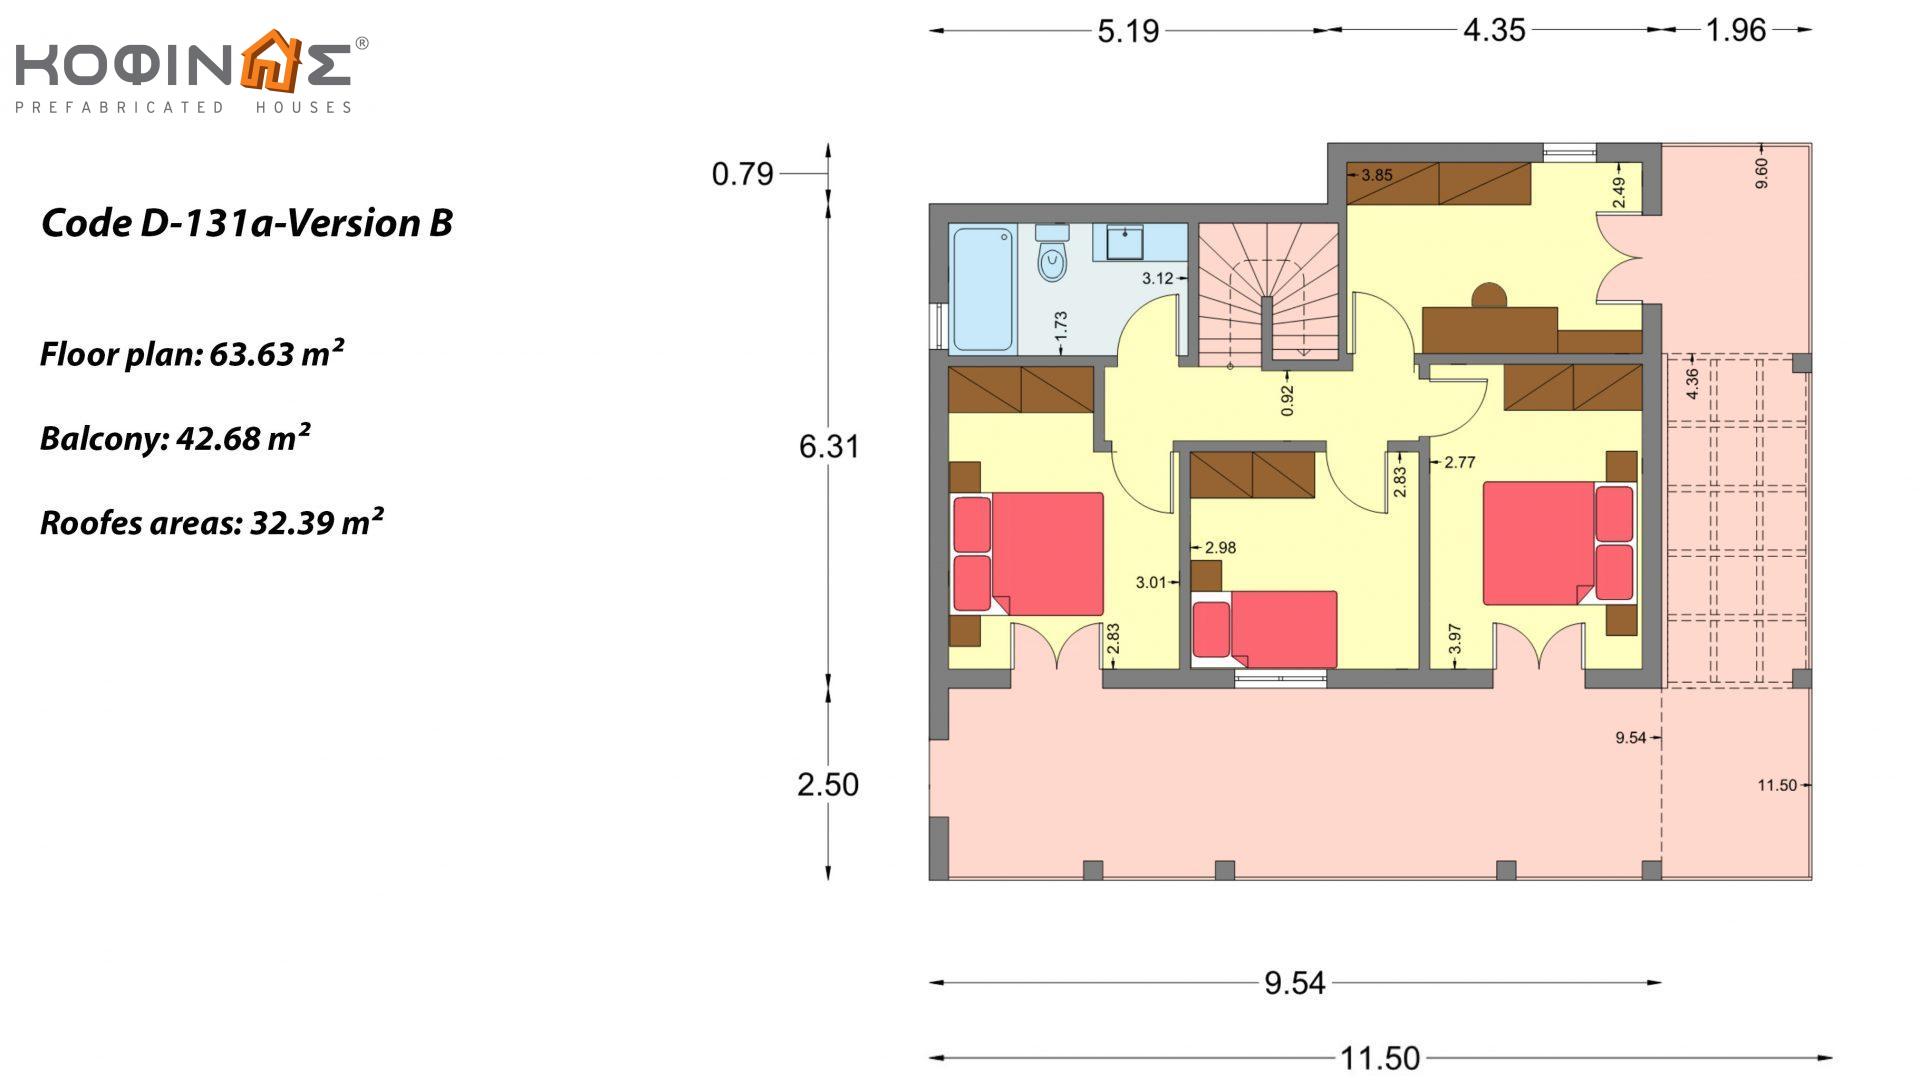 2-story house D-131a, total surface of 131.23 m² (Version A), 142.65 m² (Version B) ,covered roofed areas 63.69 m²,balconies 54.11 m²(Version A), 42.68 m²(Version B)